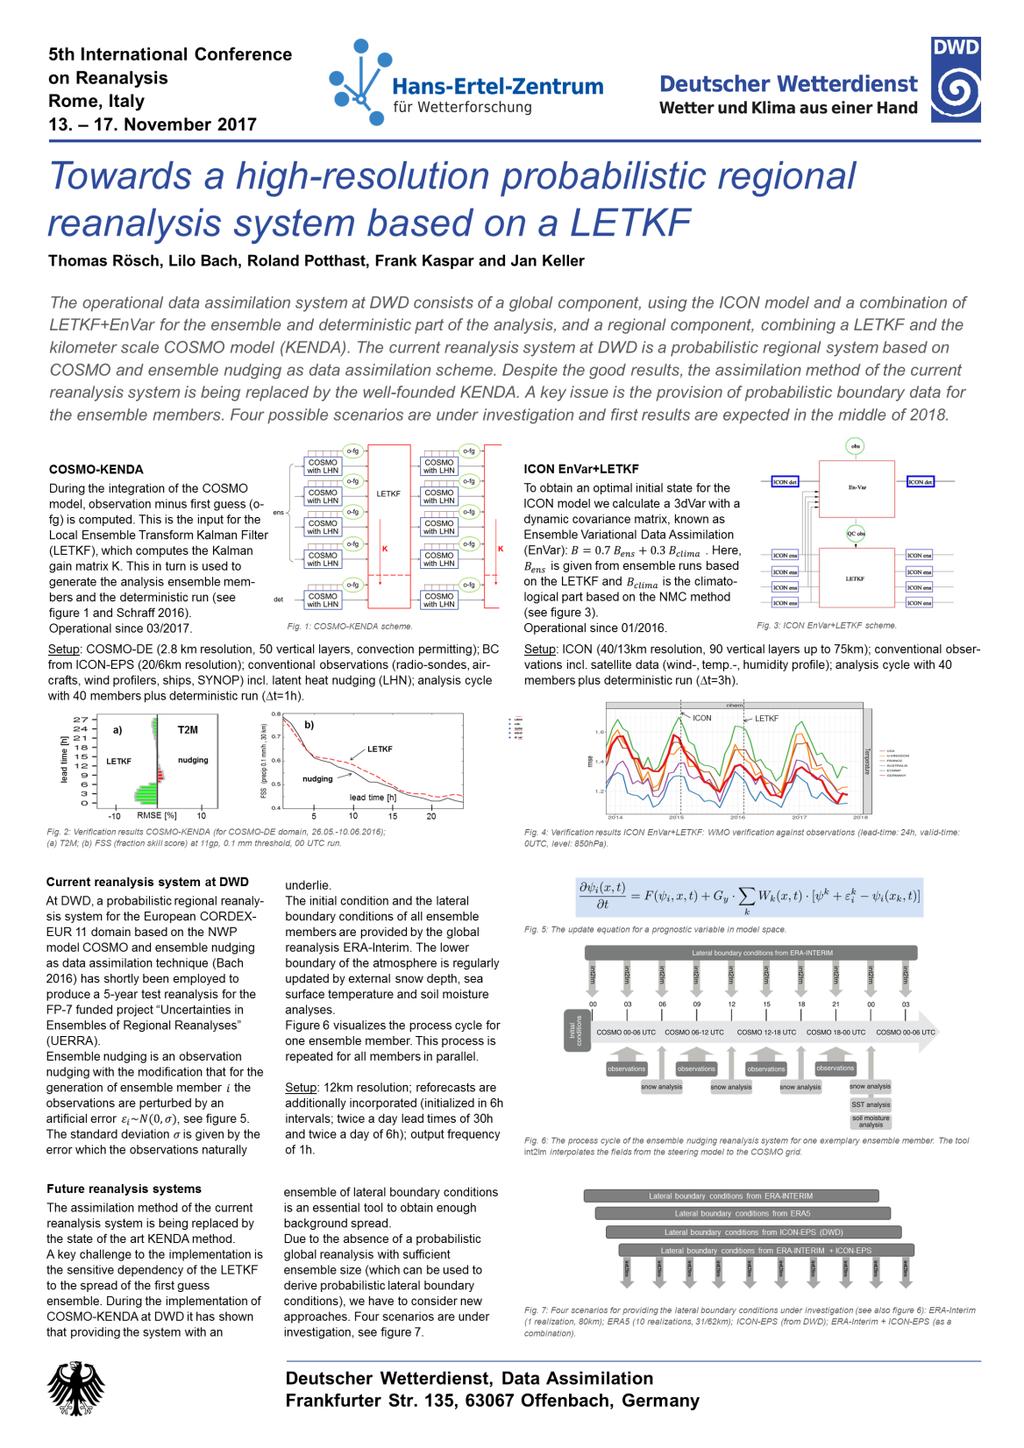 ICON-based reanalysis see Poster: Rösch et al.